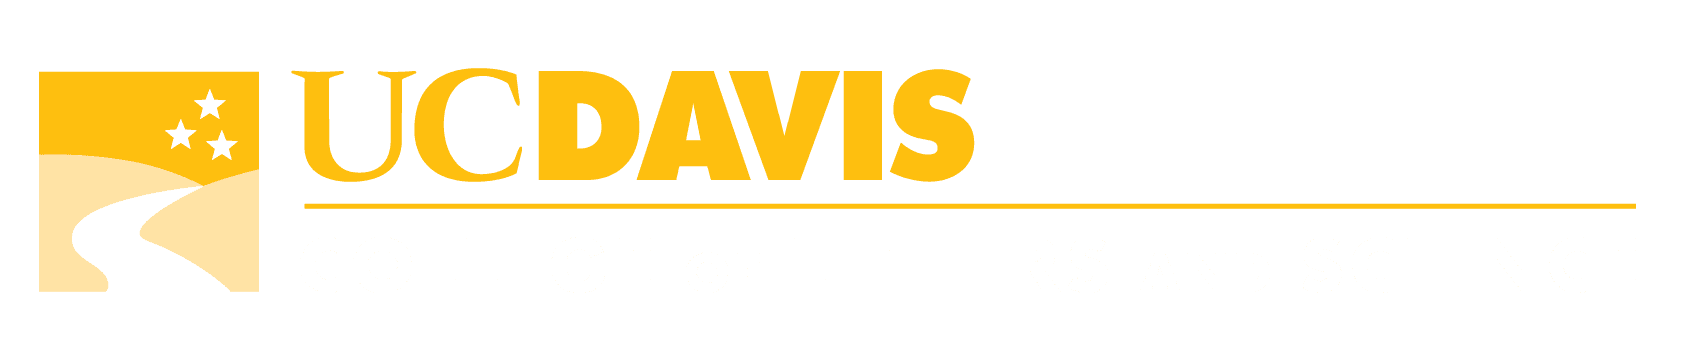 UC Davis College of Letters and Science Logo